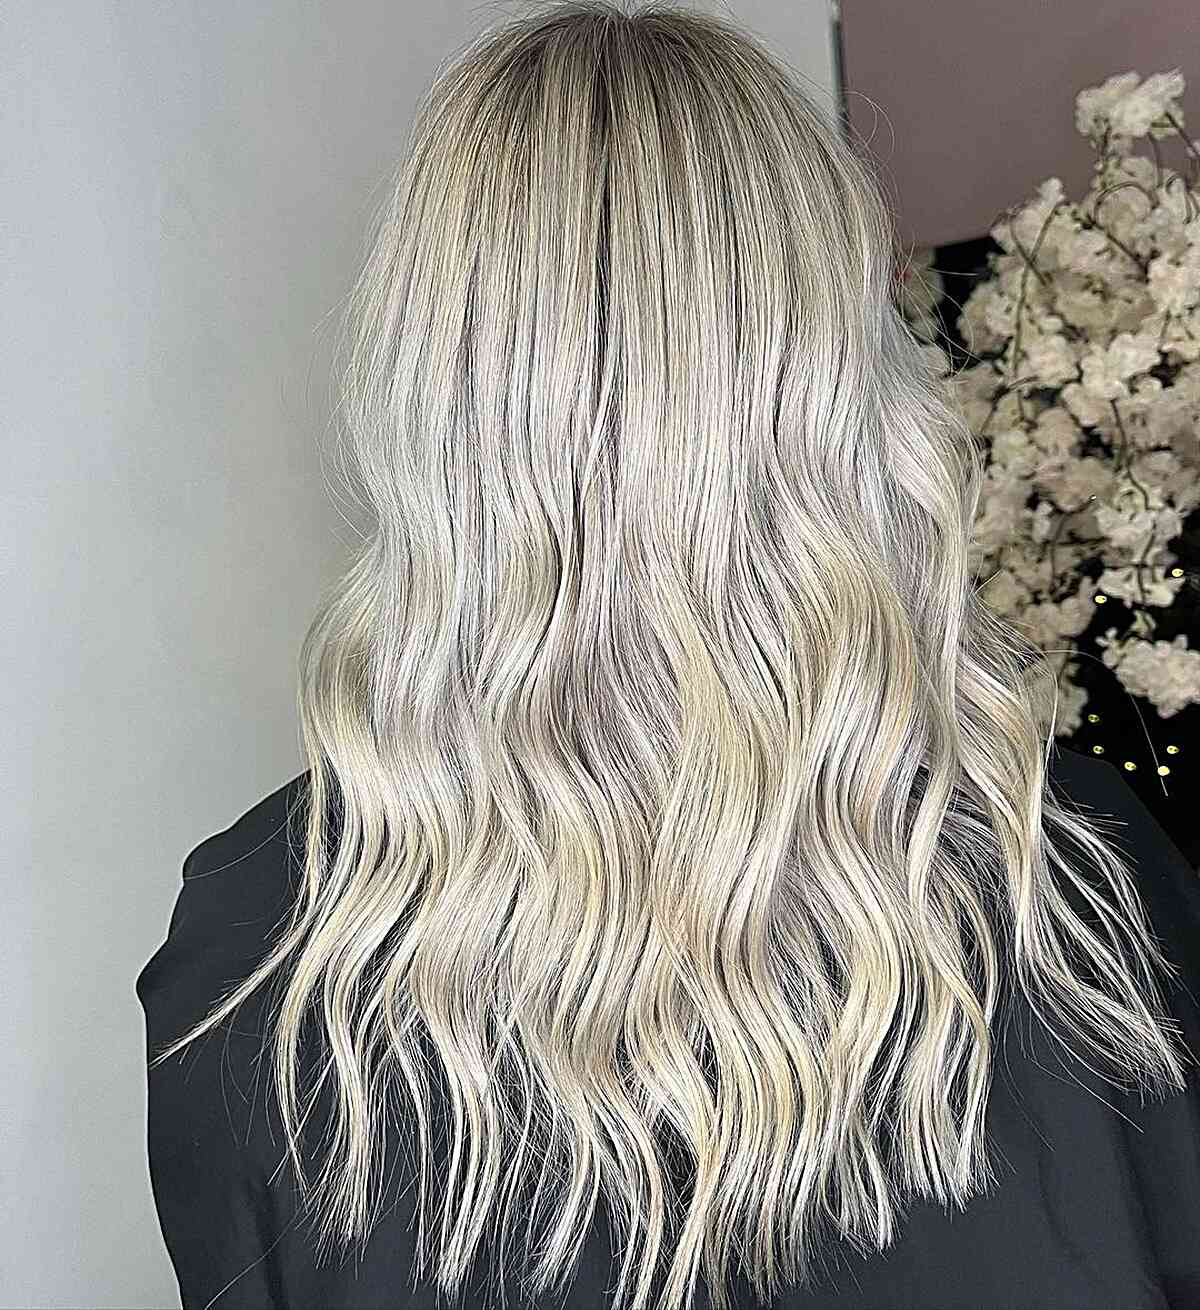 40+ Stunning Platinum Blonde Hair Colors That'll Get You Noticed